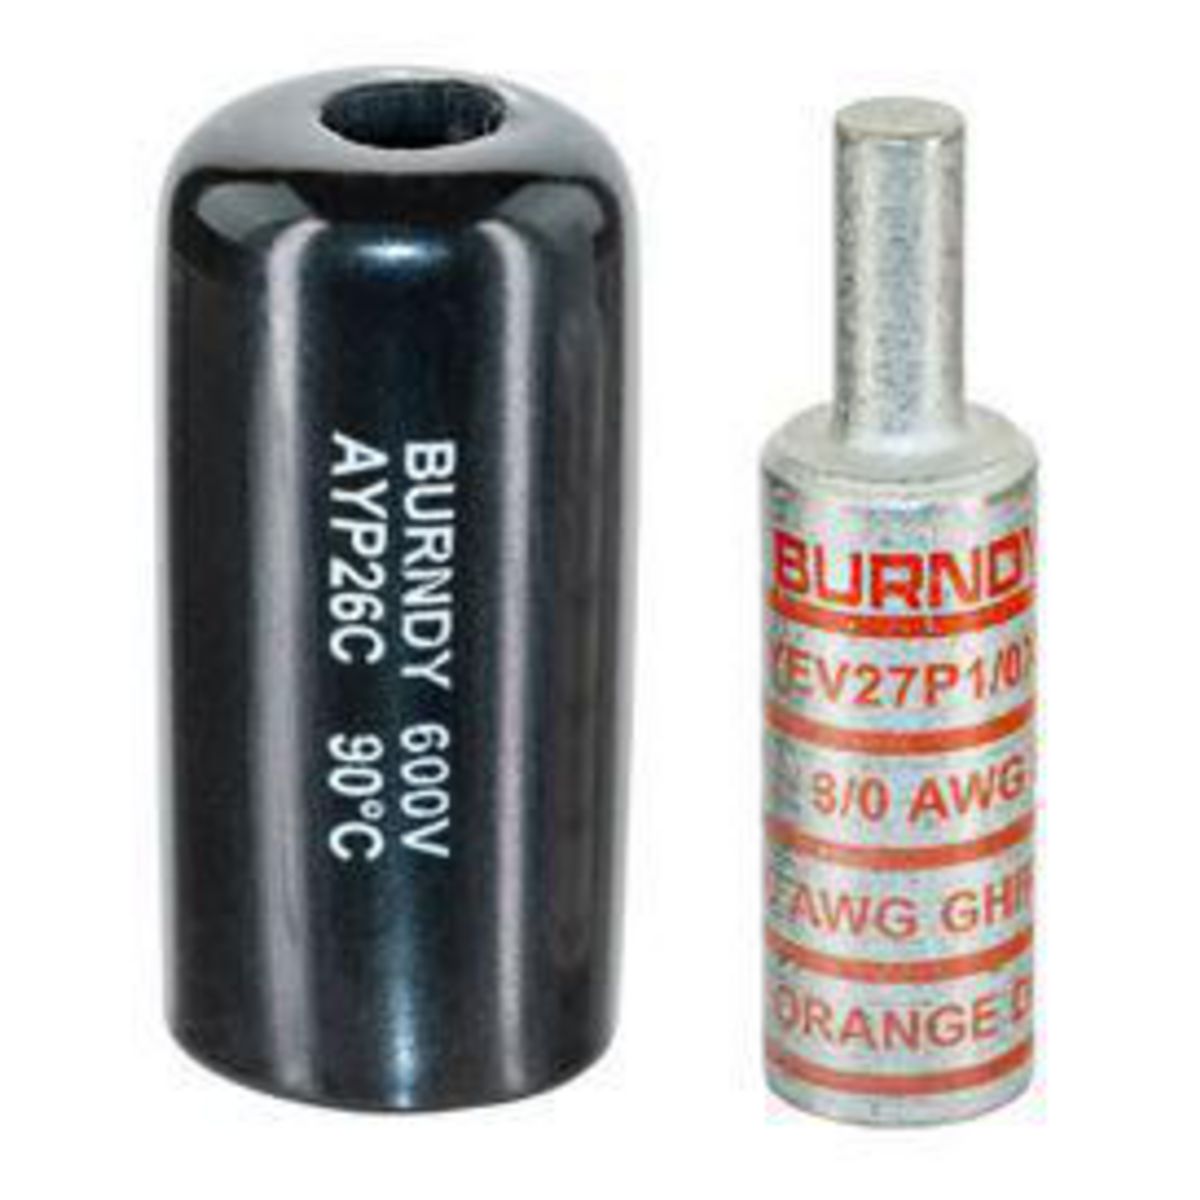 3/0 AWG CU TO 1/0 AWG SOLID PIN TERMINAL